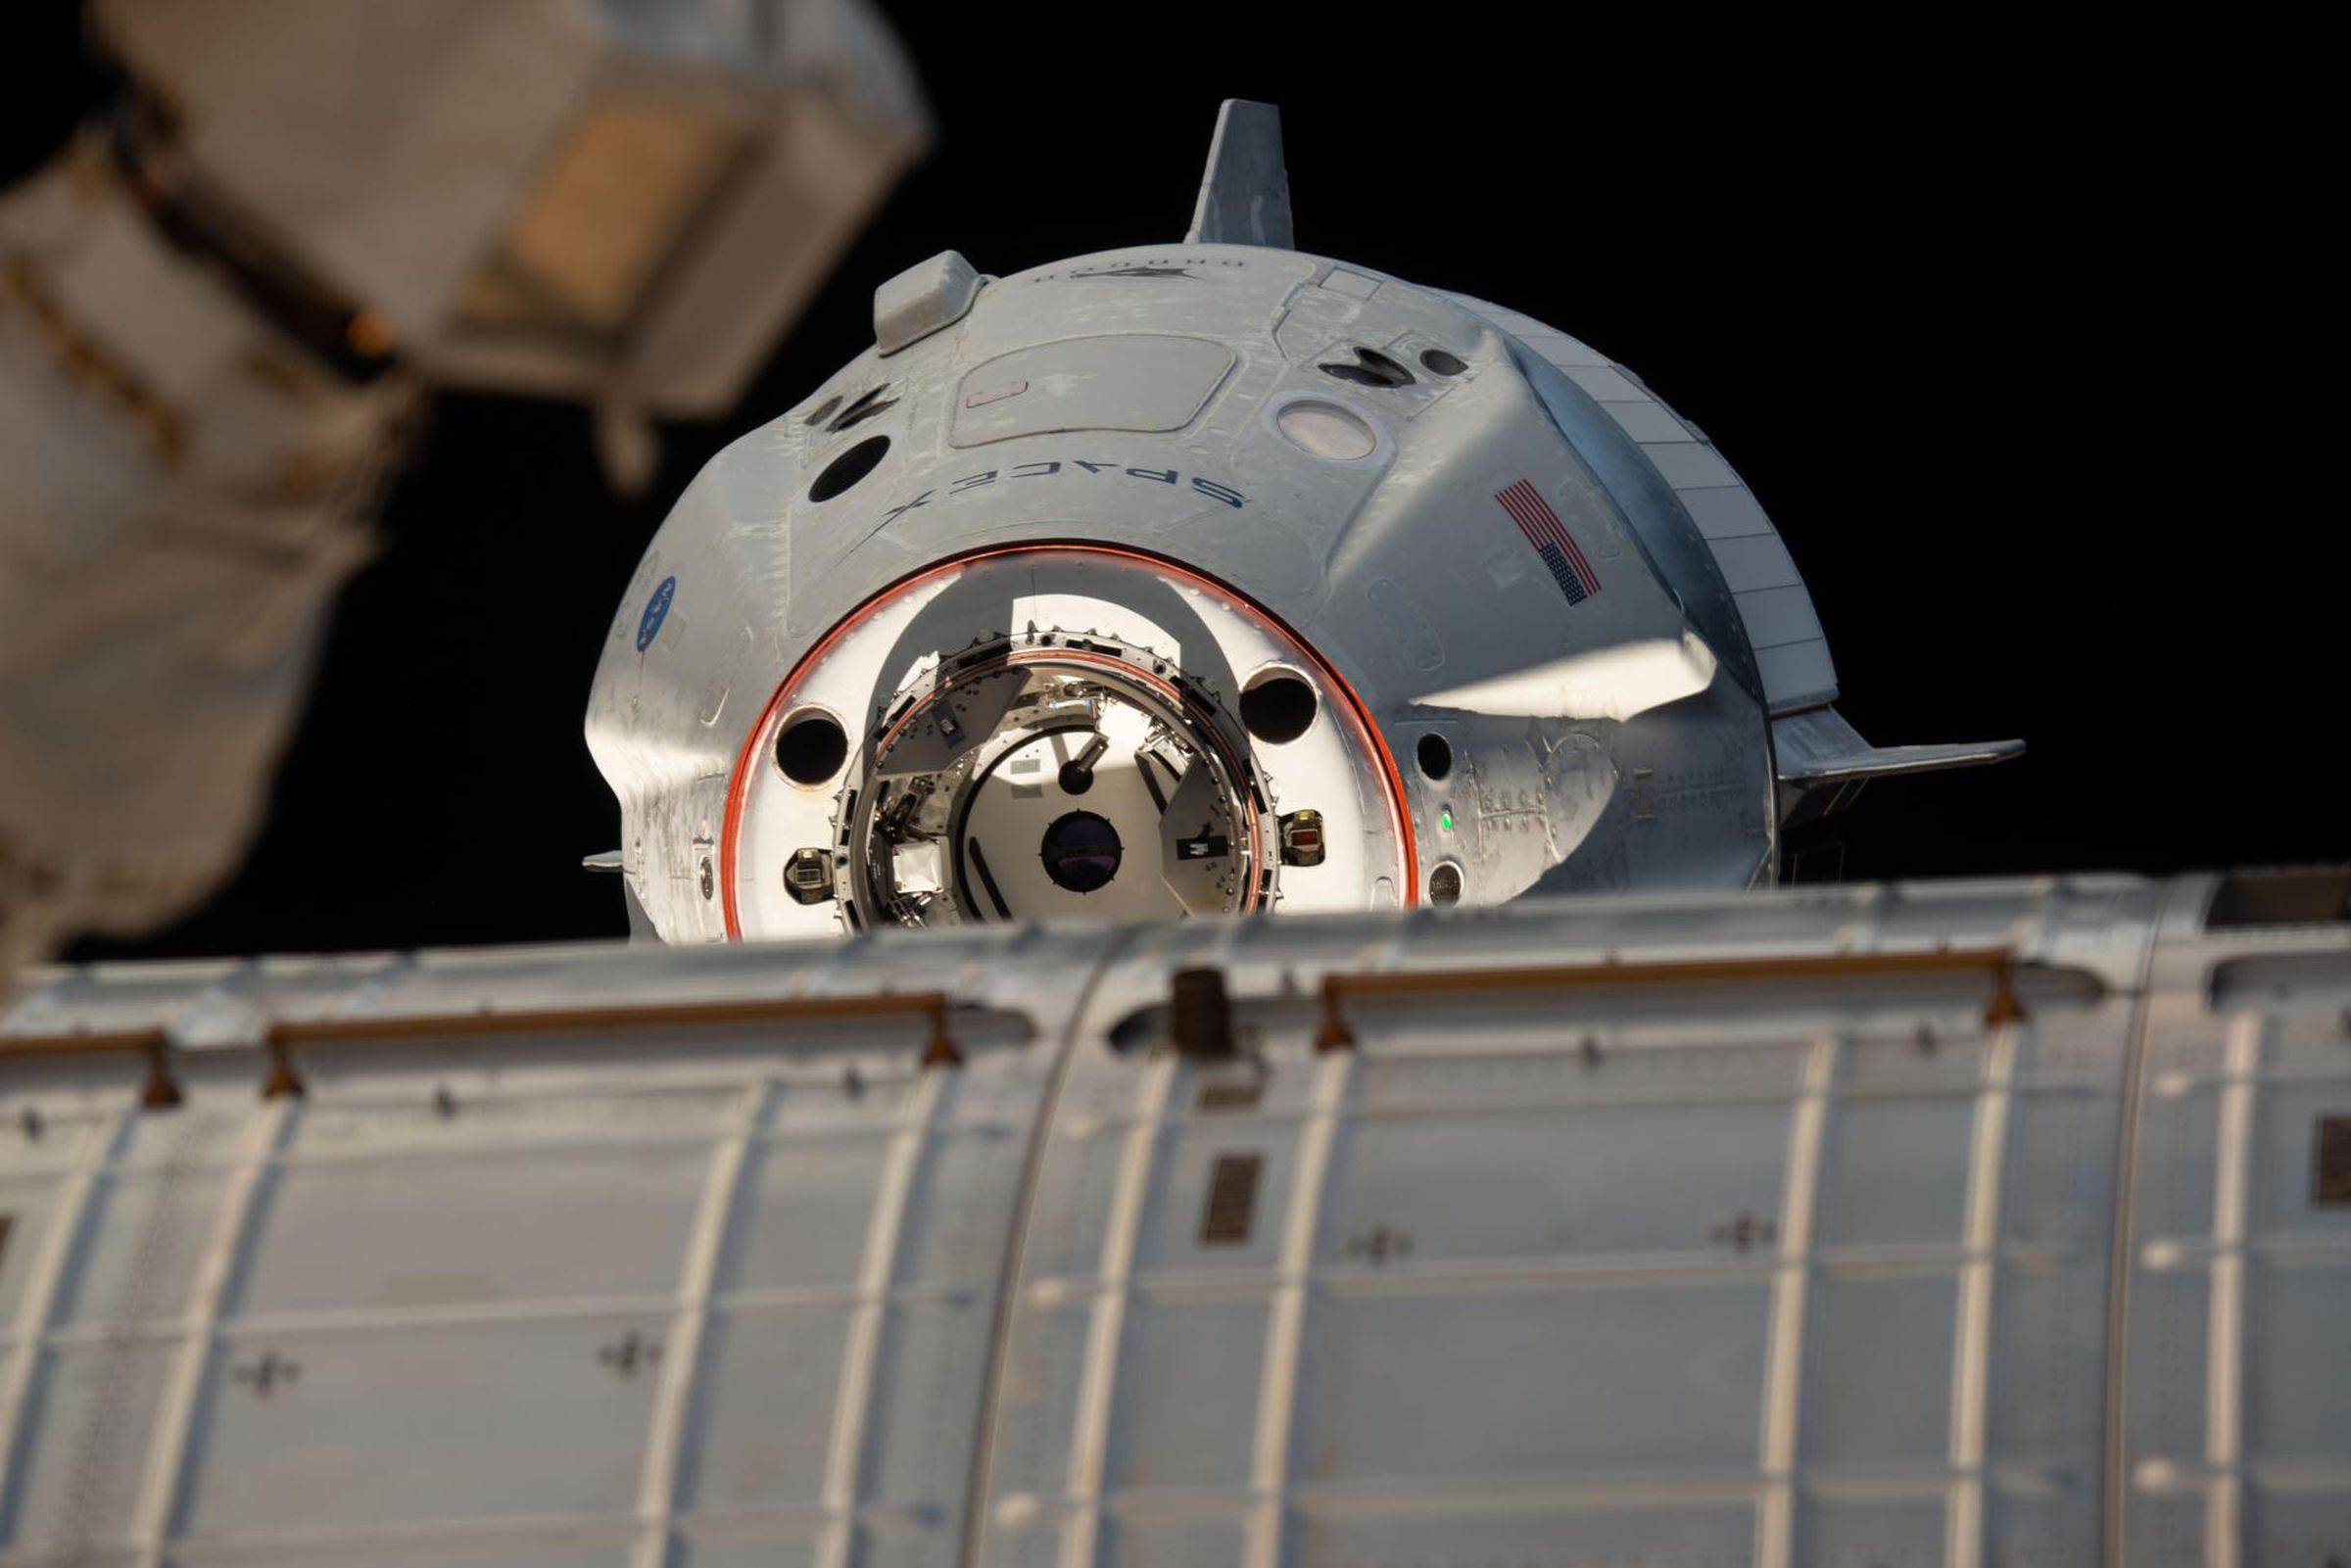 SpaceX’s Crew Dragon automatically docked with the International Space Station for the first time on March 4th.